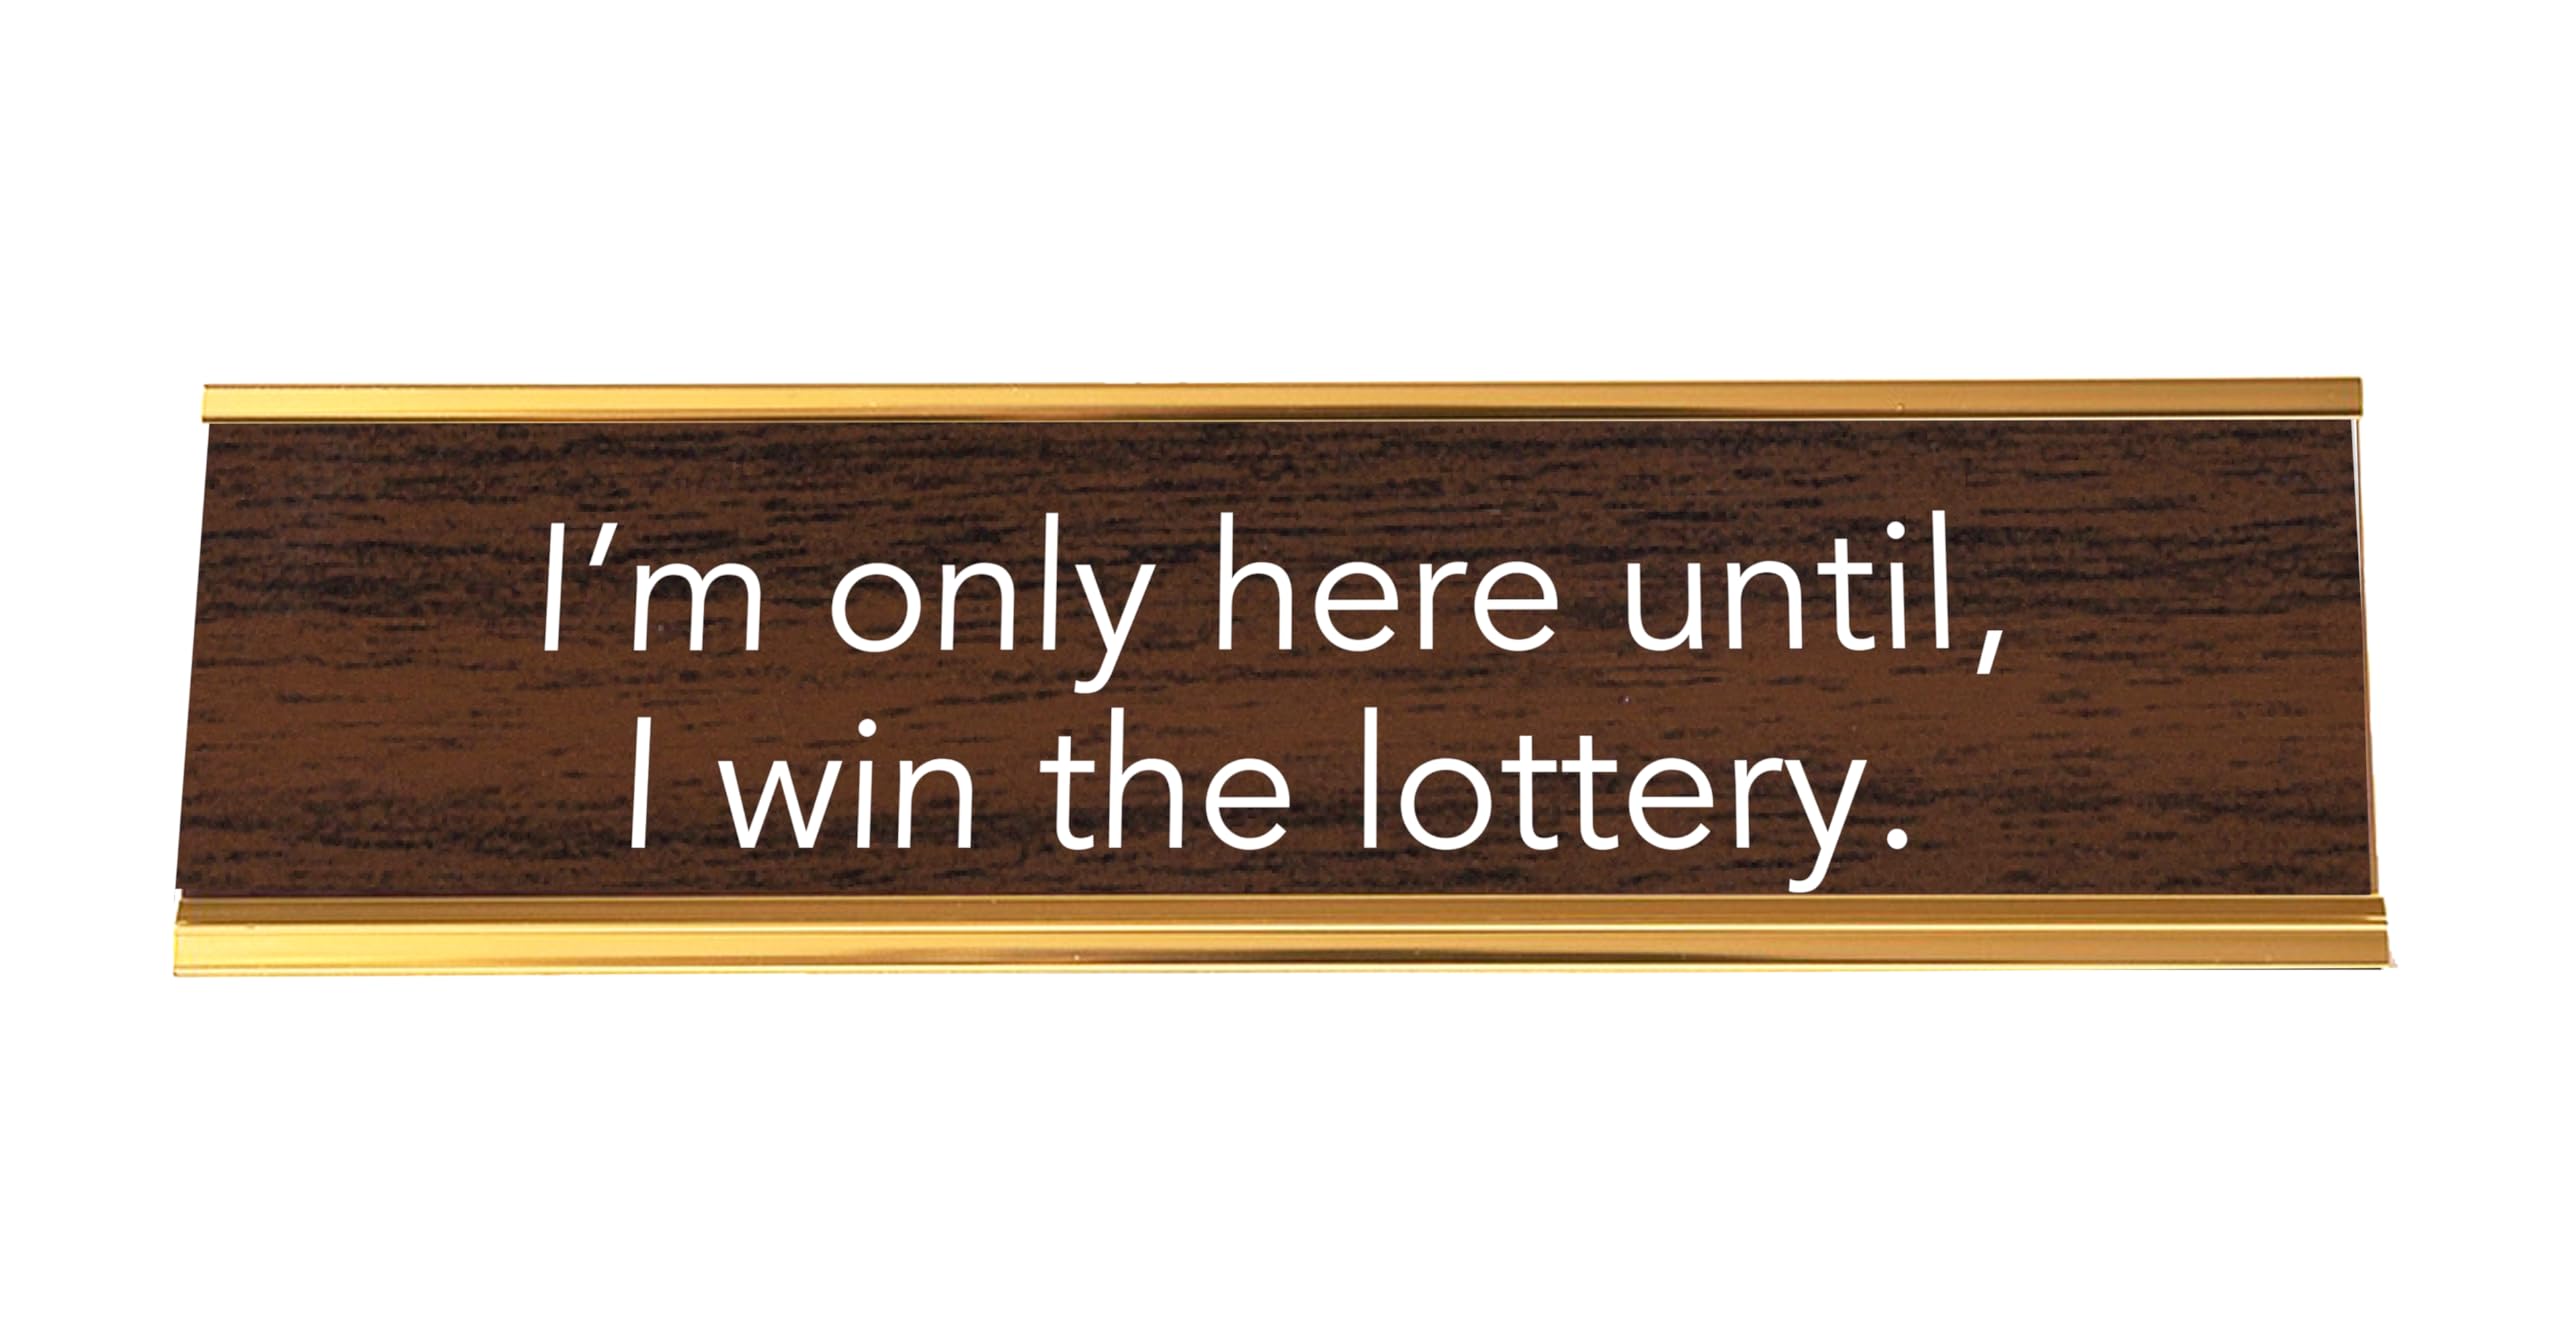 I'M ONLY HERE UNTIL I WIN THE LOTTERY Nameplate Style Desk Sign (Brown and Gold)